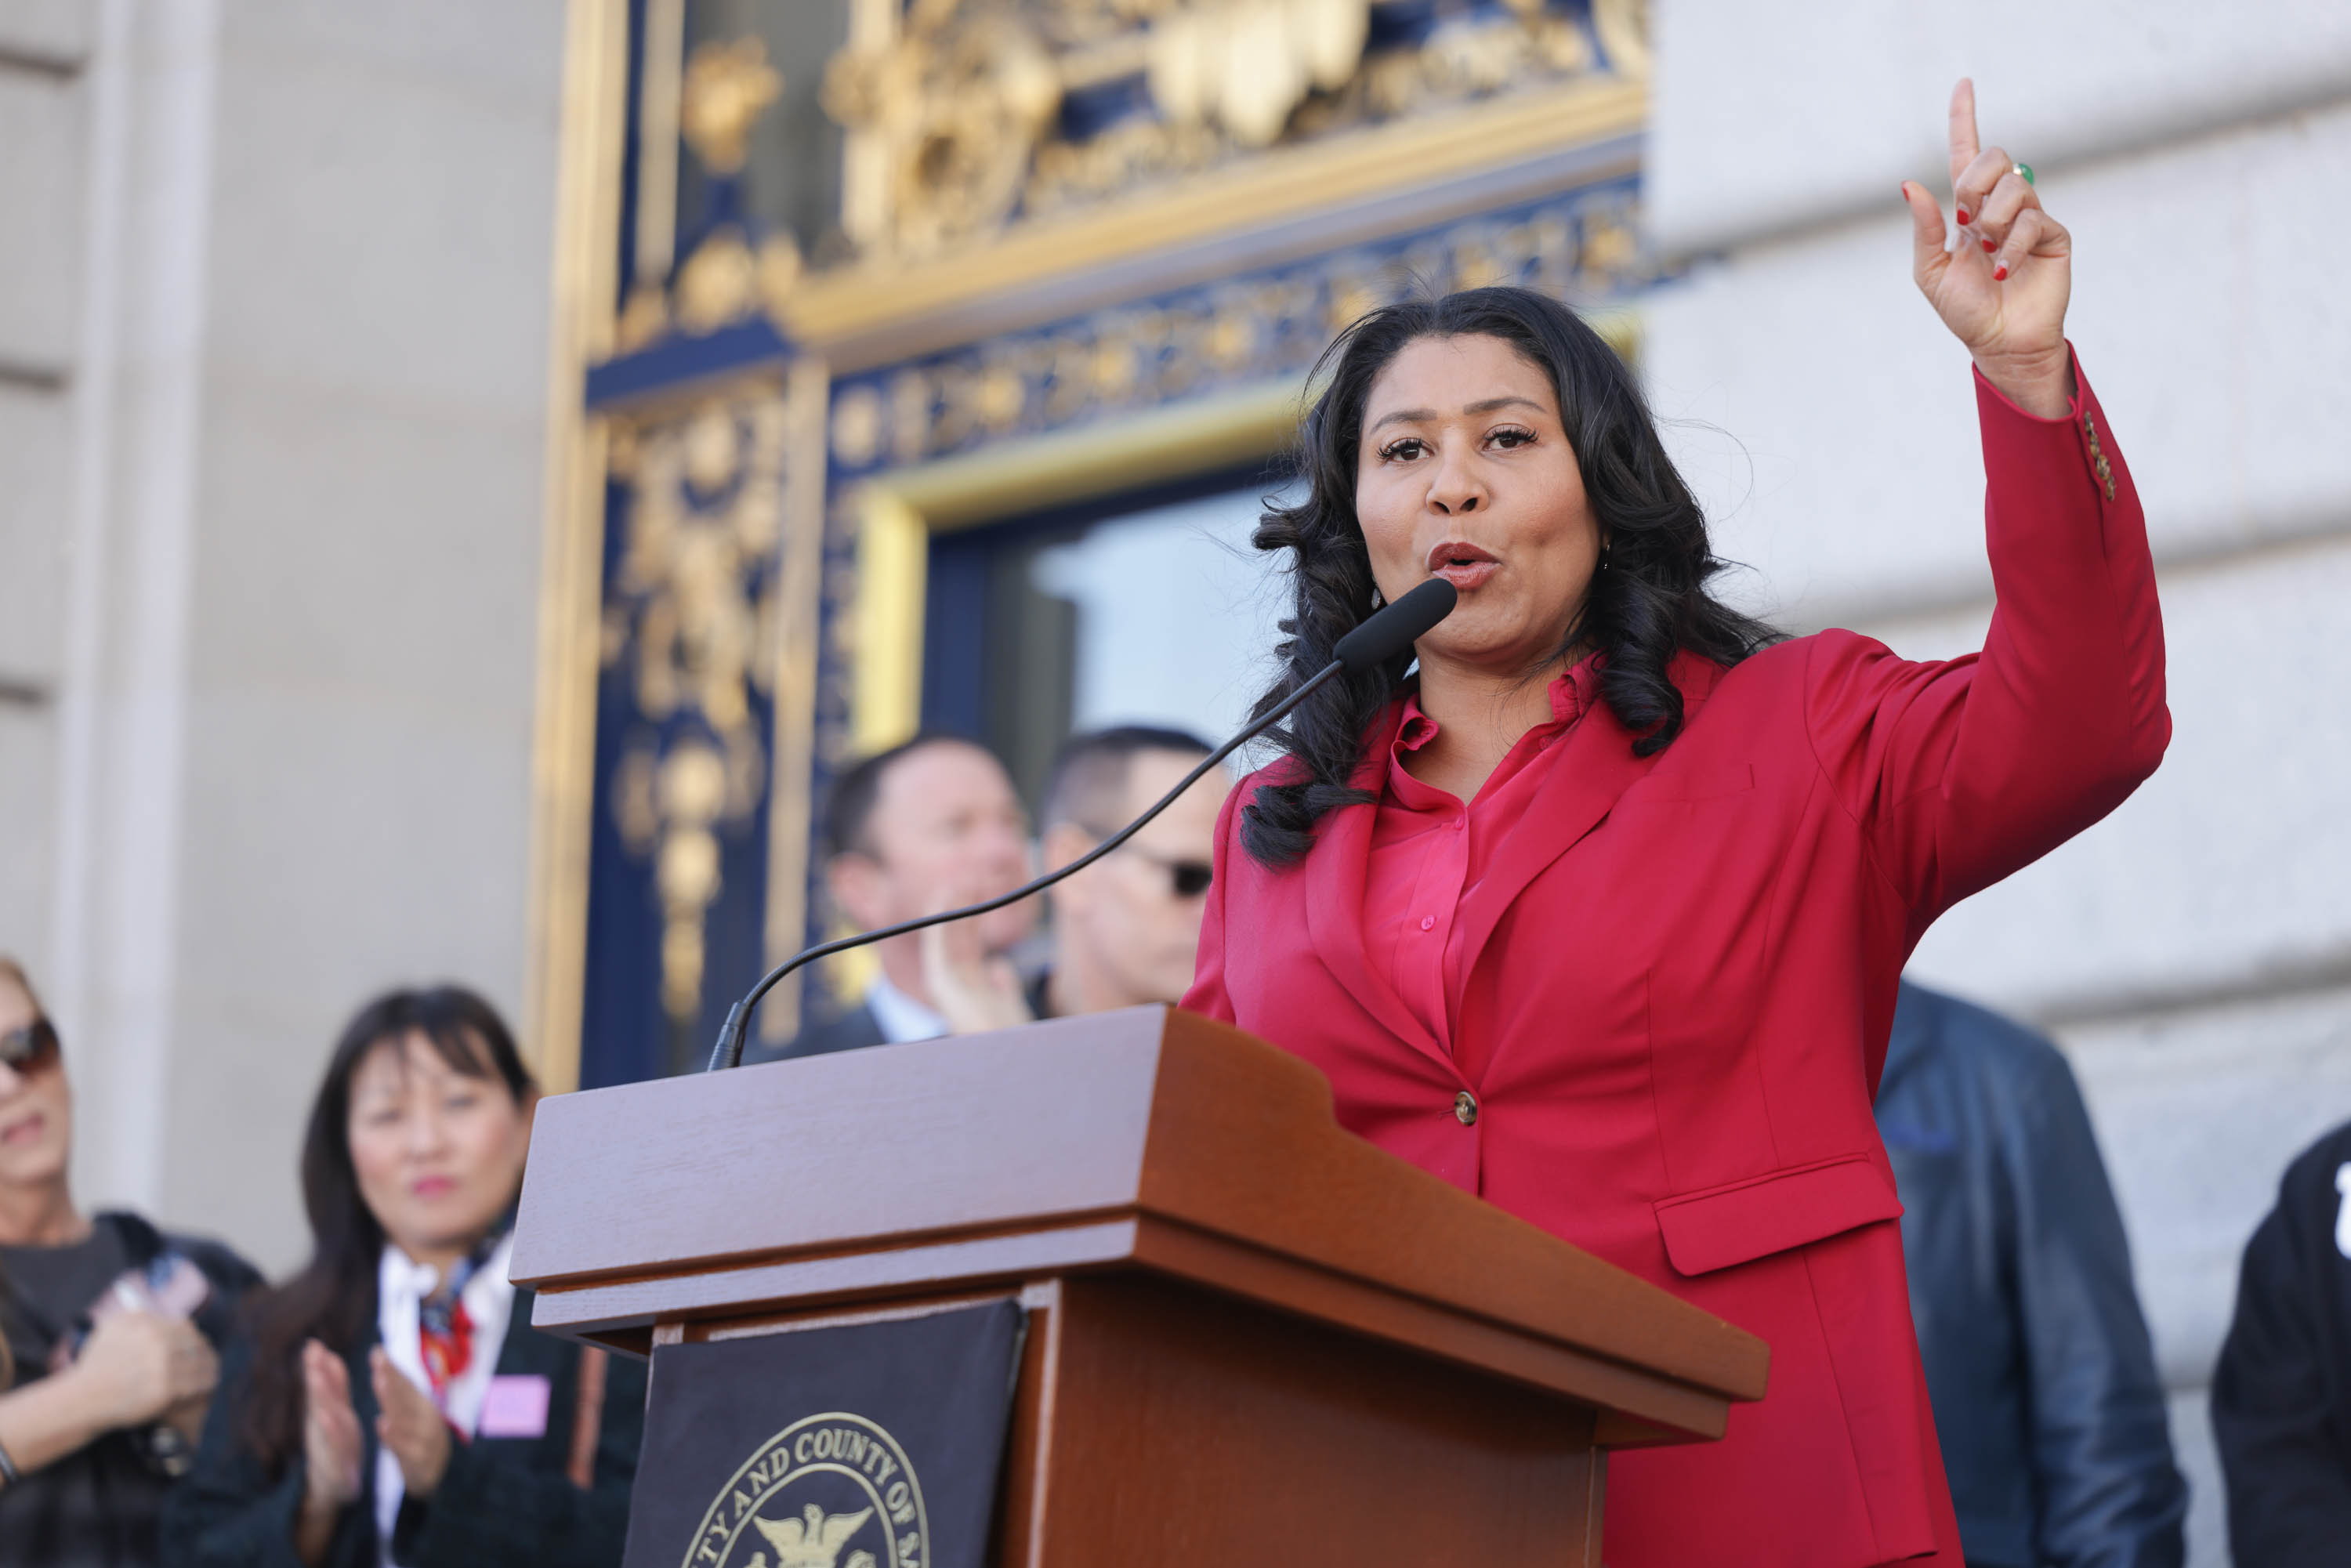 A woman in a red suit gestures energetically at a podium, addressing an audience, with others clapping in the background.